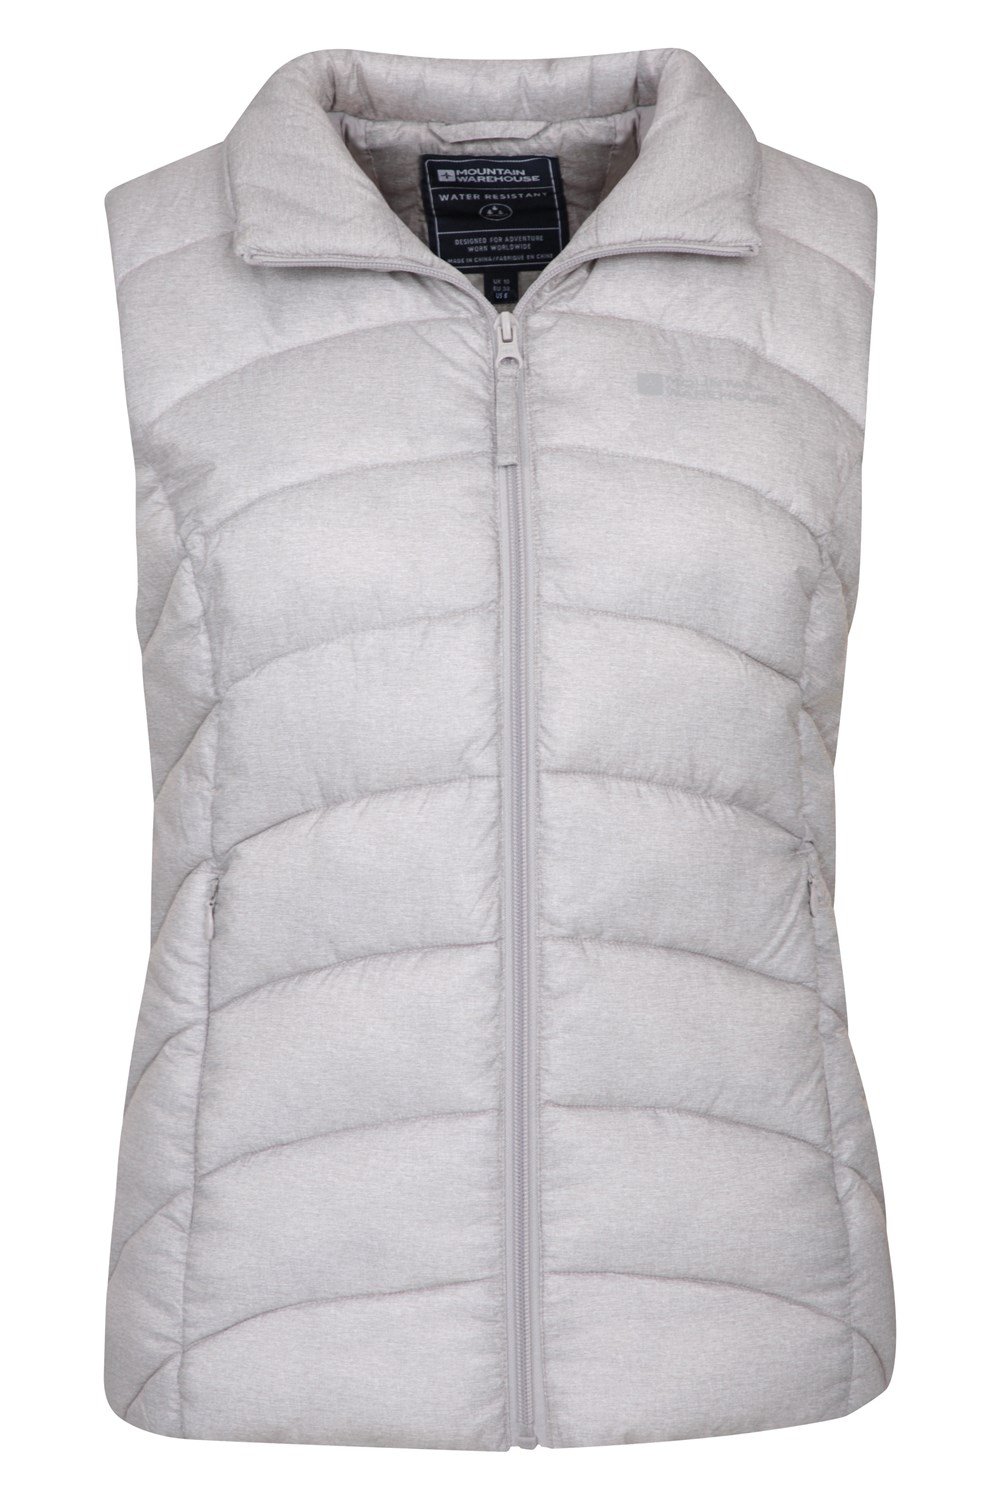 Mountain Warehouse Womens Padded Puffer Vest-Insulated for Winter | eBay